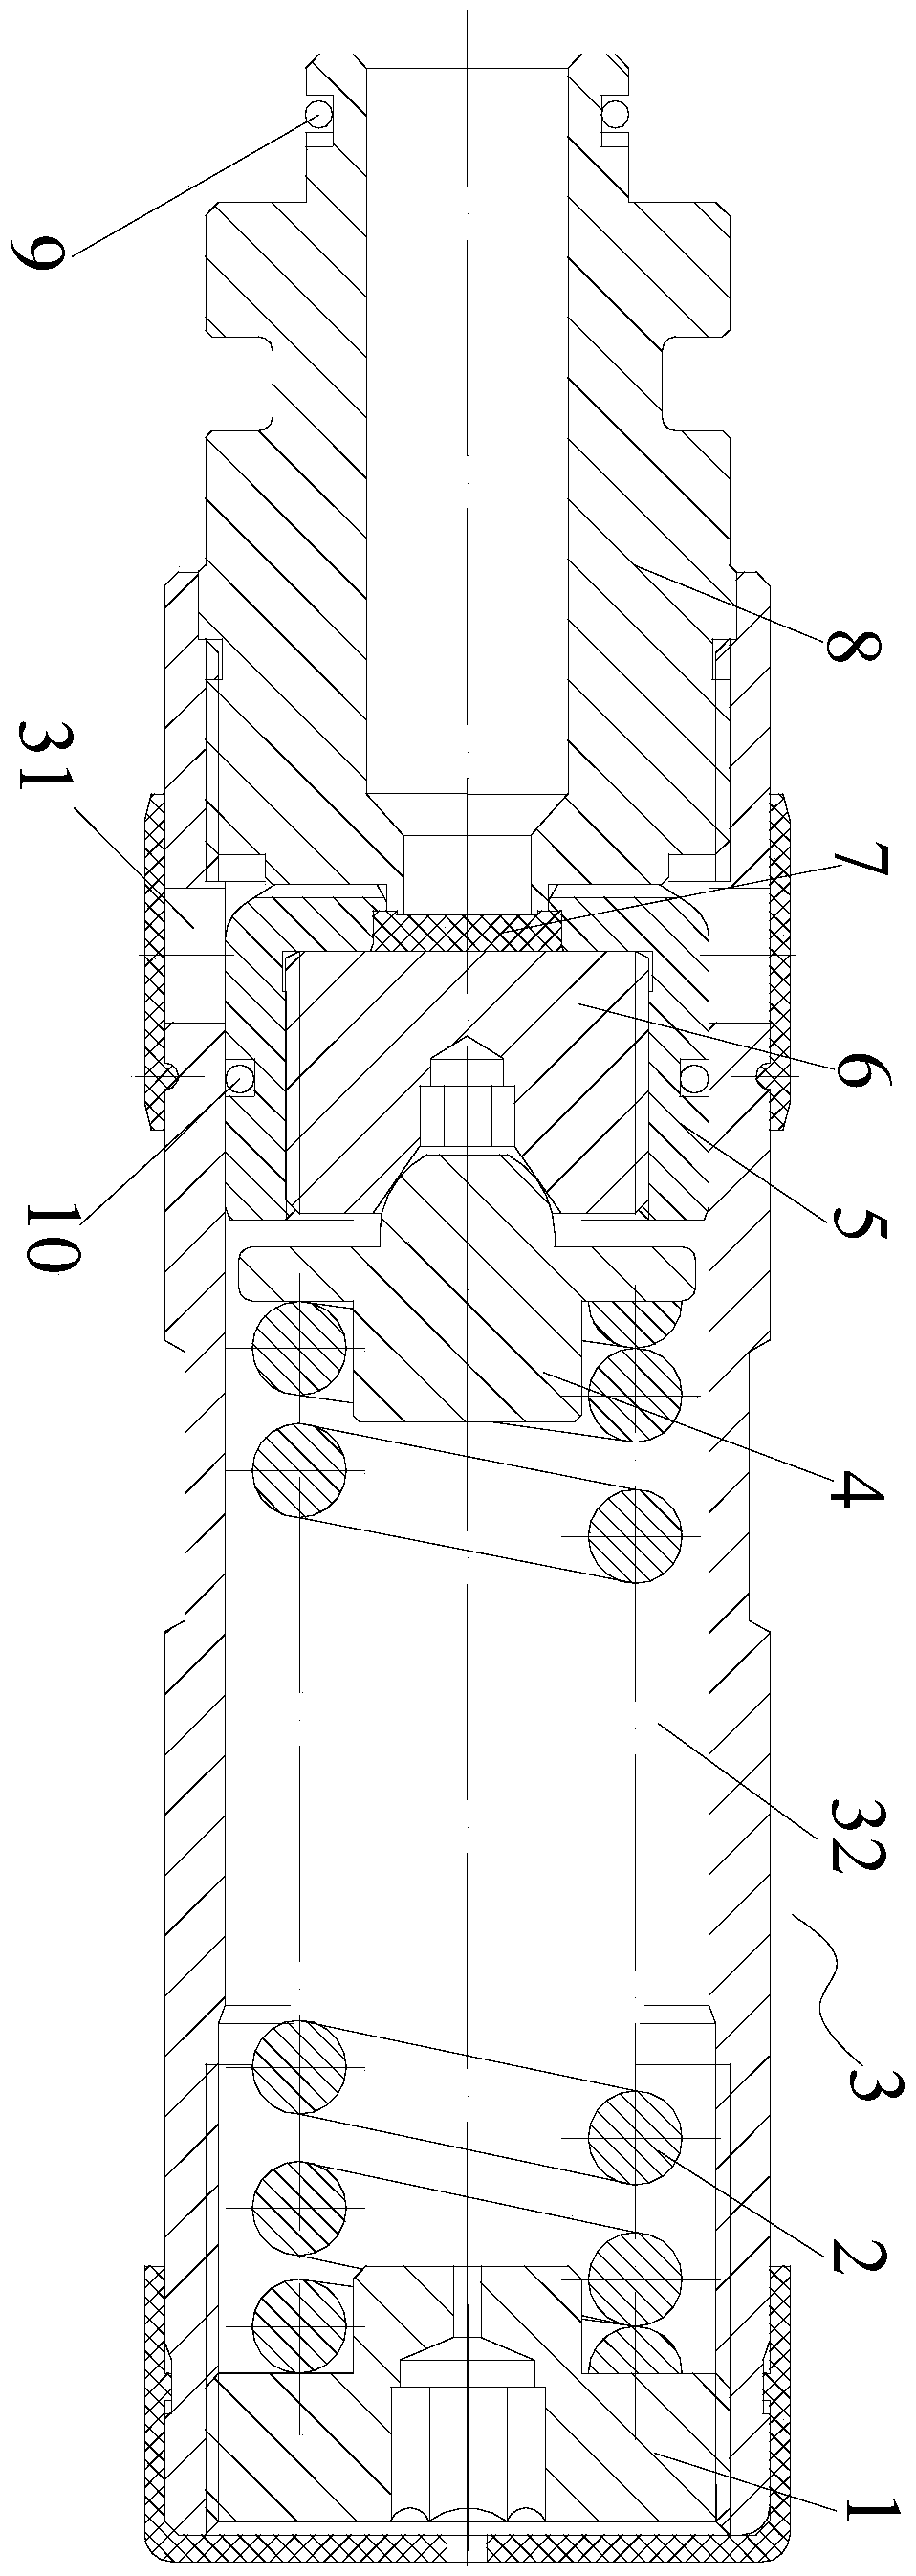 Switching mechanism for large-flow overflow safety valve